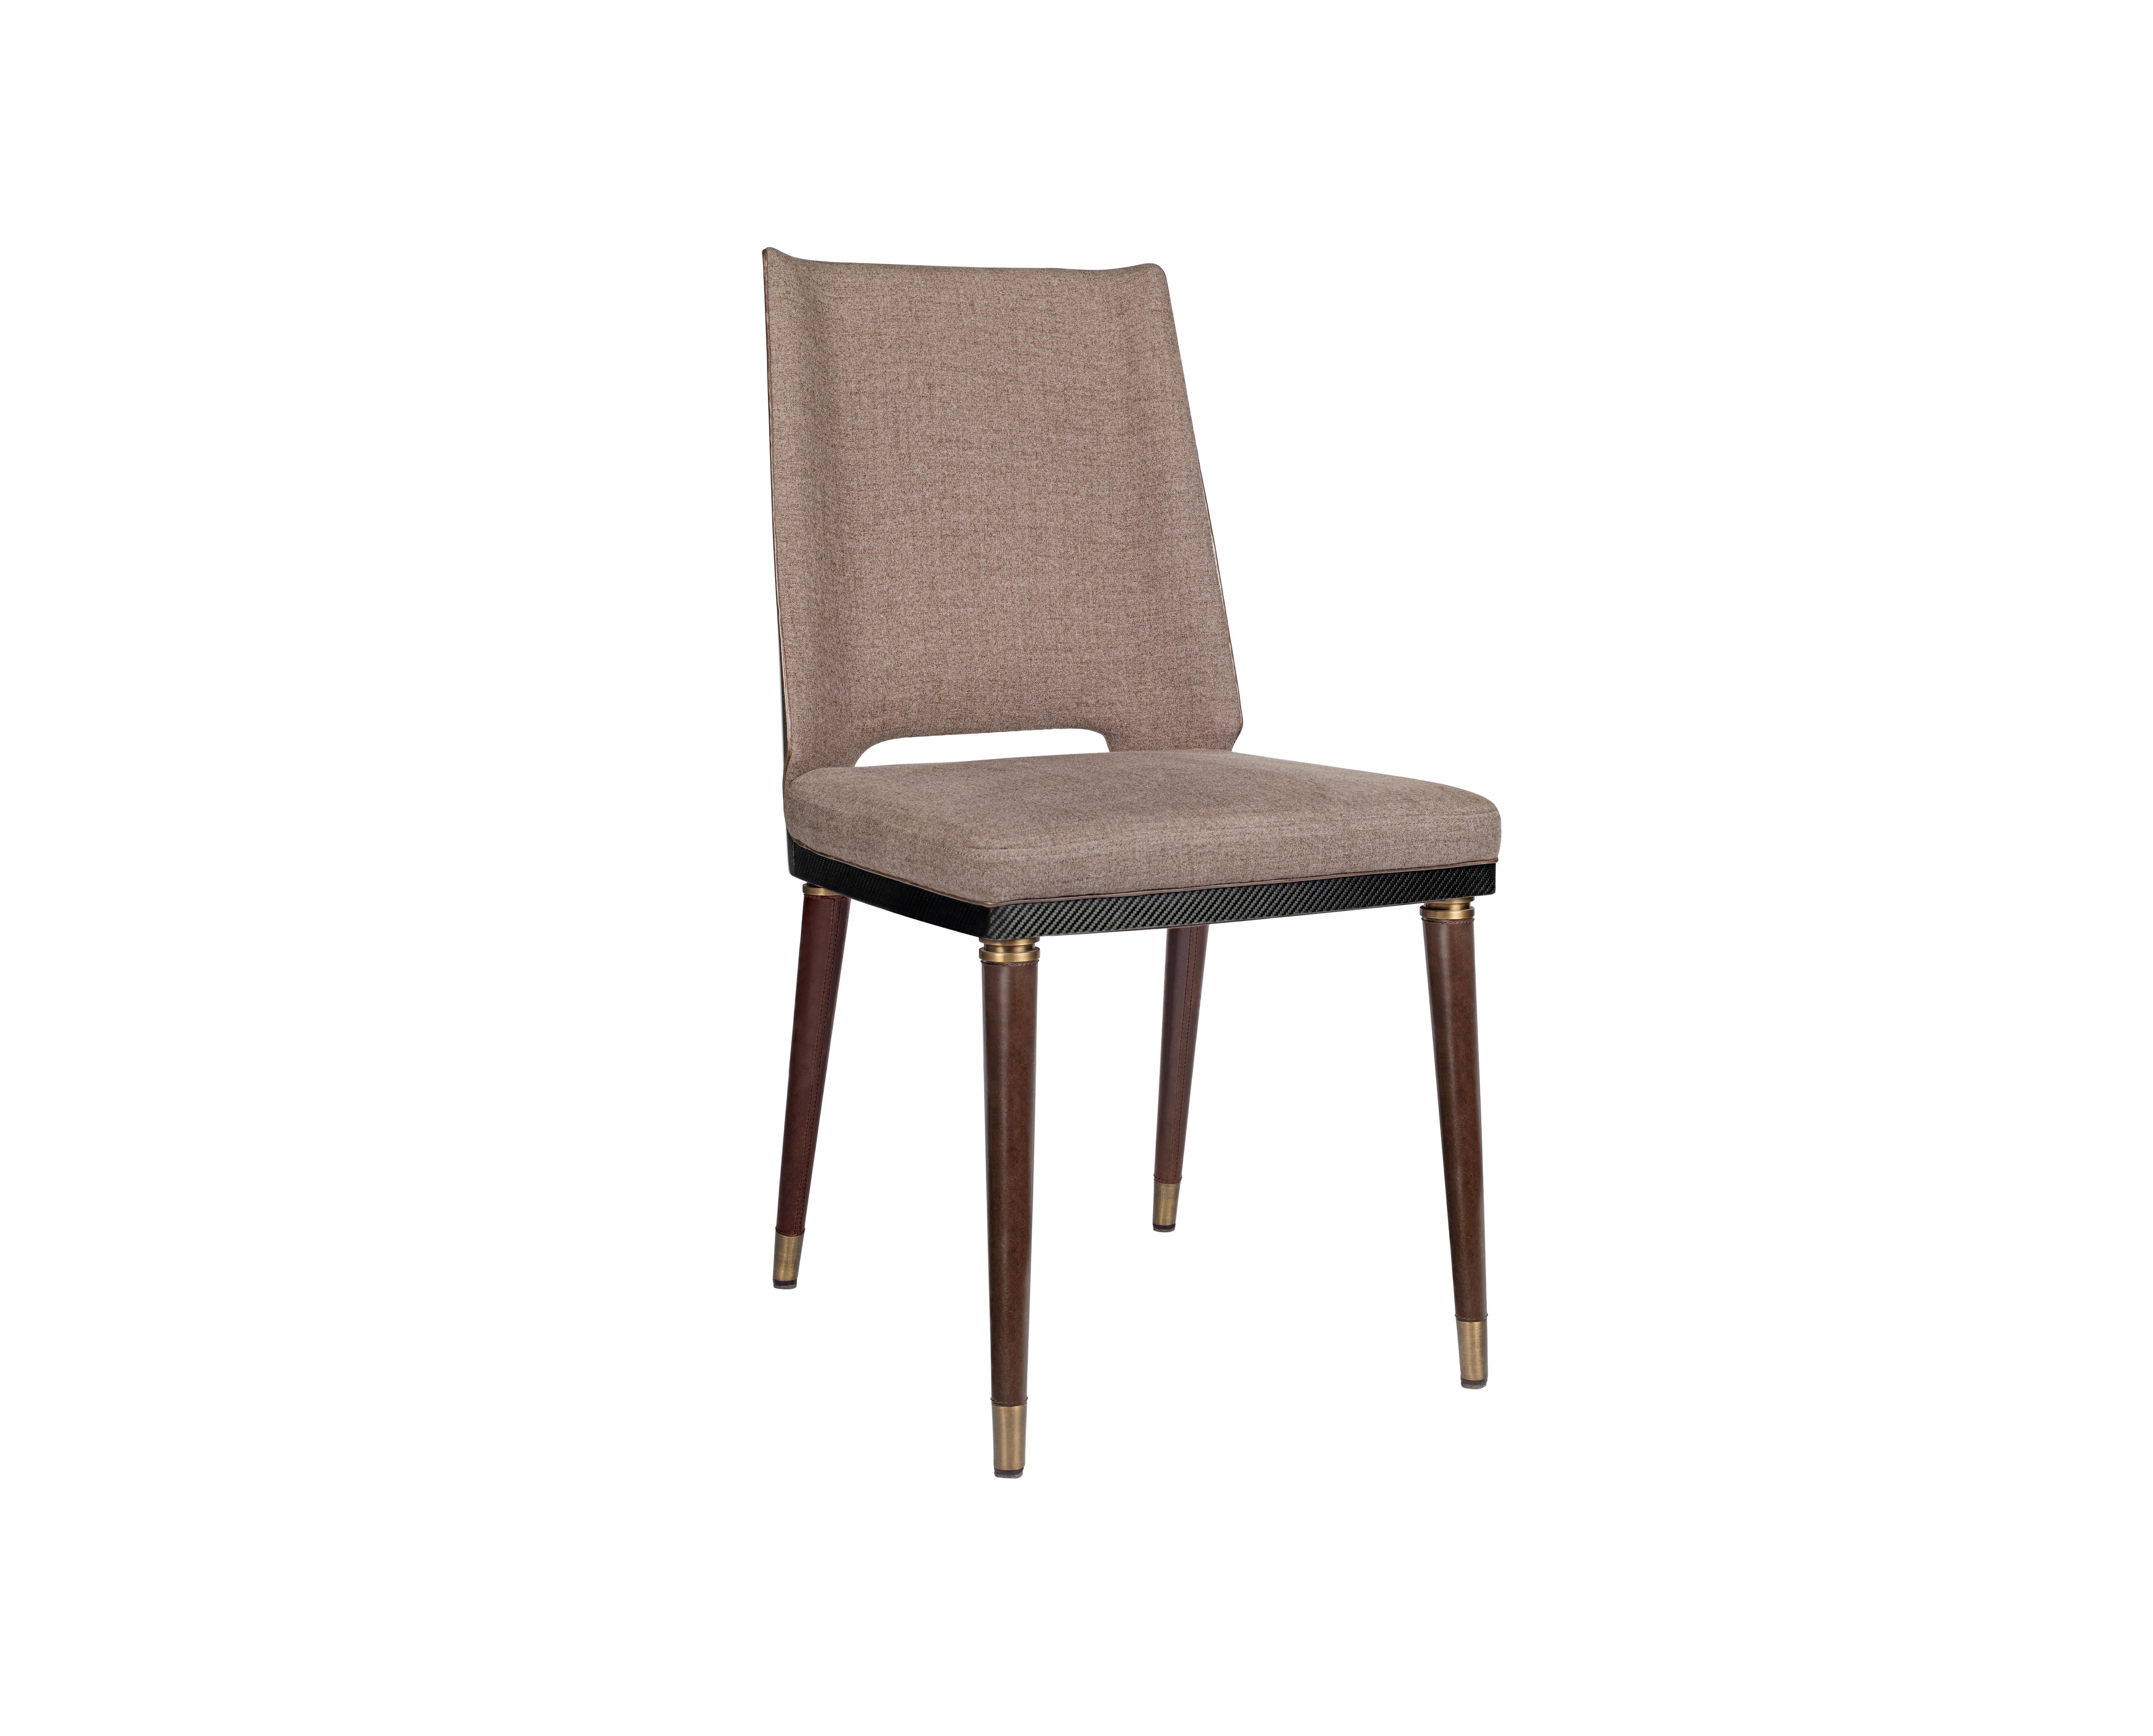 Indian Carbon Fibre Irving Dining Chair by Madheke For Sale